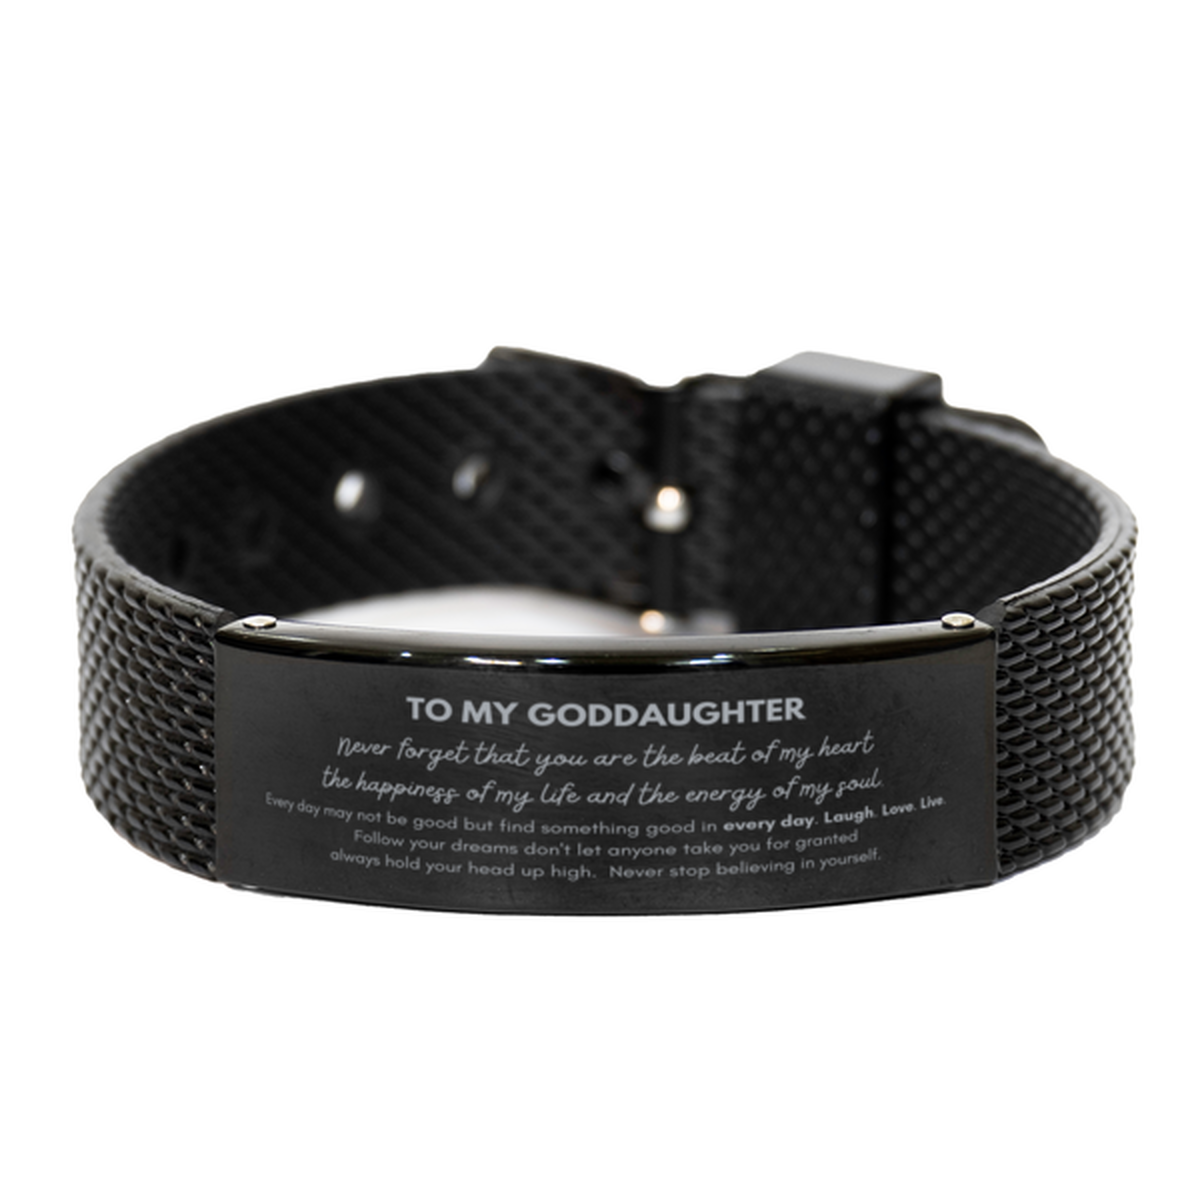 To My Goddaughter Bracelet Gifts, Christmas Goddaughter Black Shark Mesh Bracelet Present, Birthday Unique Motivational For Goddaughter, To My Goddaughter Never forget that you are the beat of my heart the happiness of my life and the energy of my soul